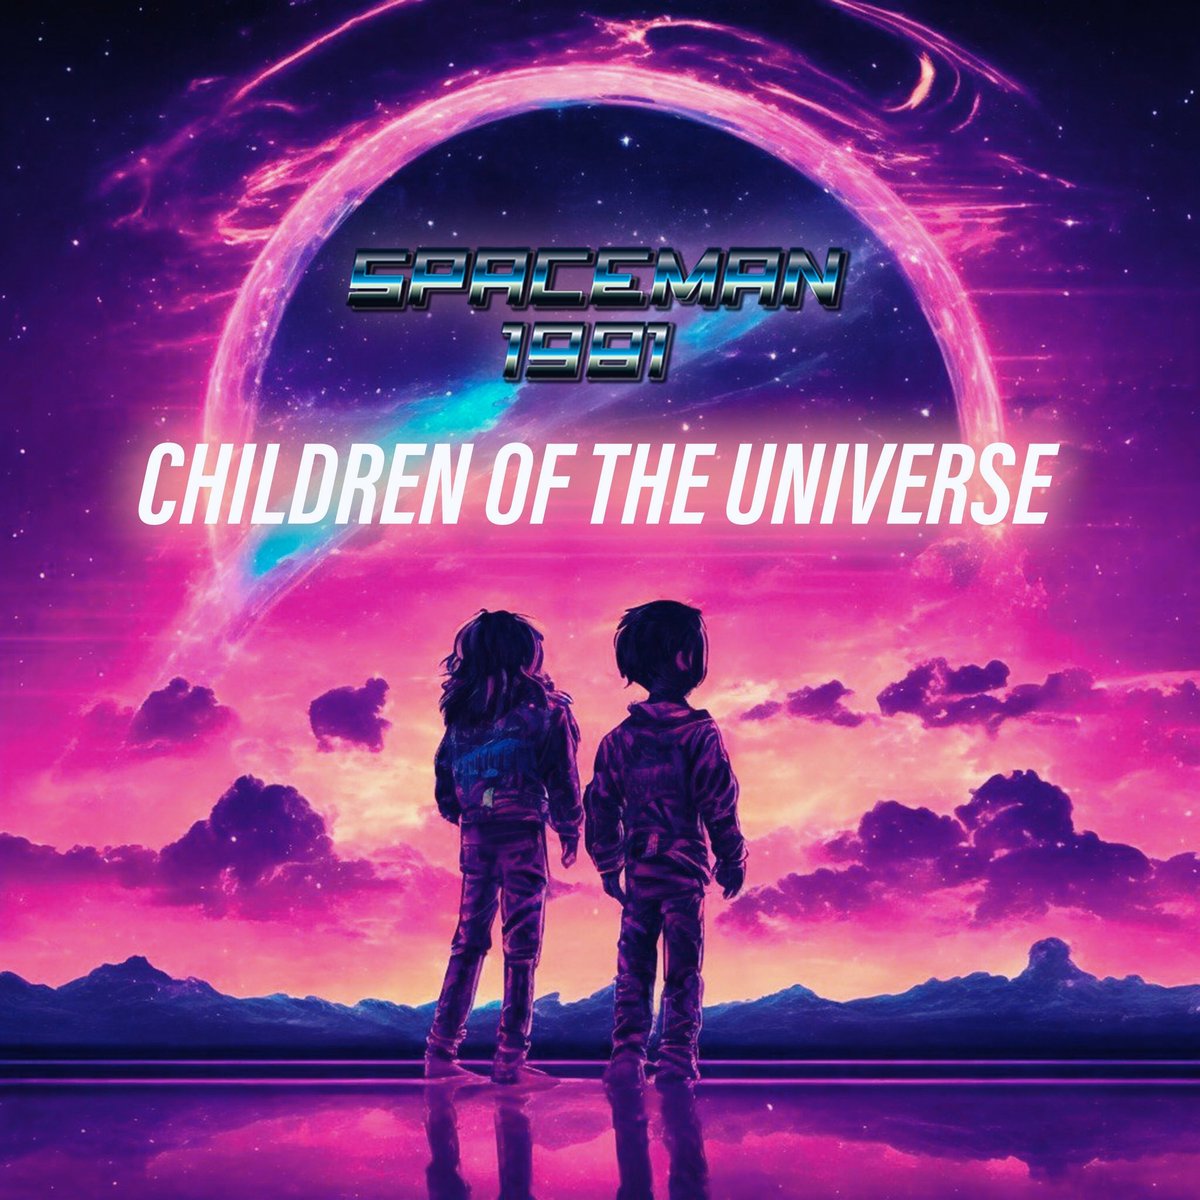 Hey, SynthFam! 🖖 Catch CHILDREN OF THE UNIVERSE free Bandcamp codes!!! an3c-hn6b 8ave-5e9x 7ke9-77xp x36n-5vm2 jayx-7yyc f7tp-jfnx lwn8-yaqq 4pay-bngt effy-xjf7 Activate here: purzynthrekords.bandcamp.com/yum #retrowave #synthwave #bandcamp